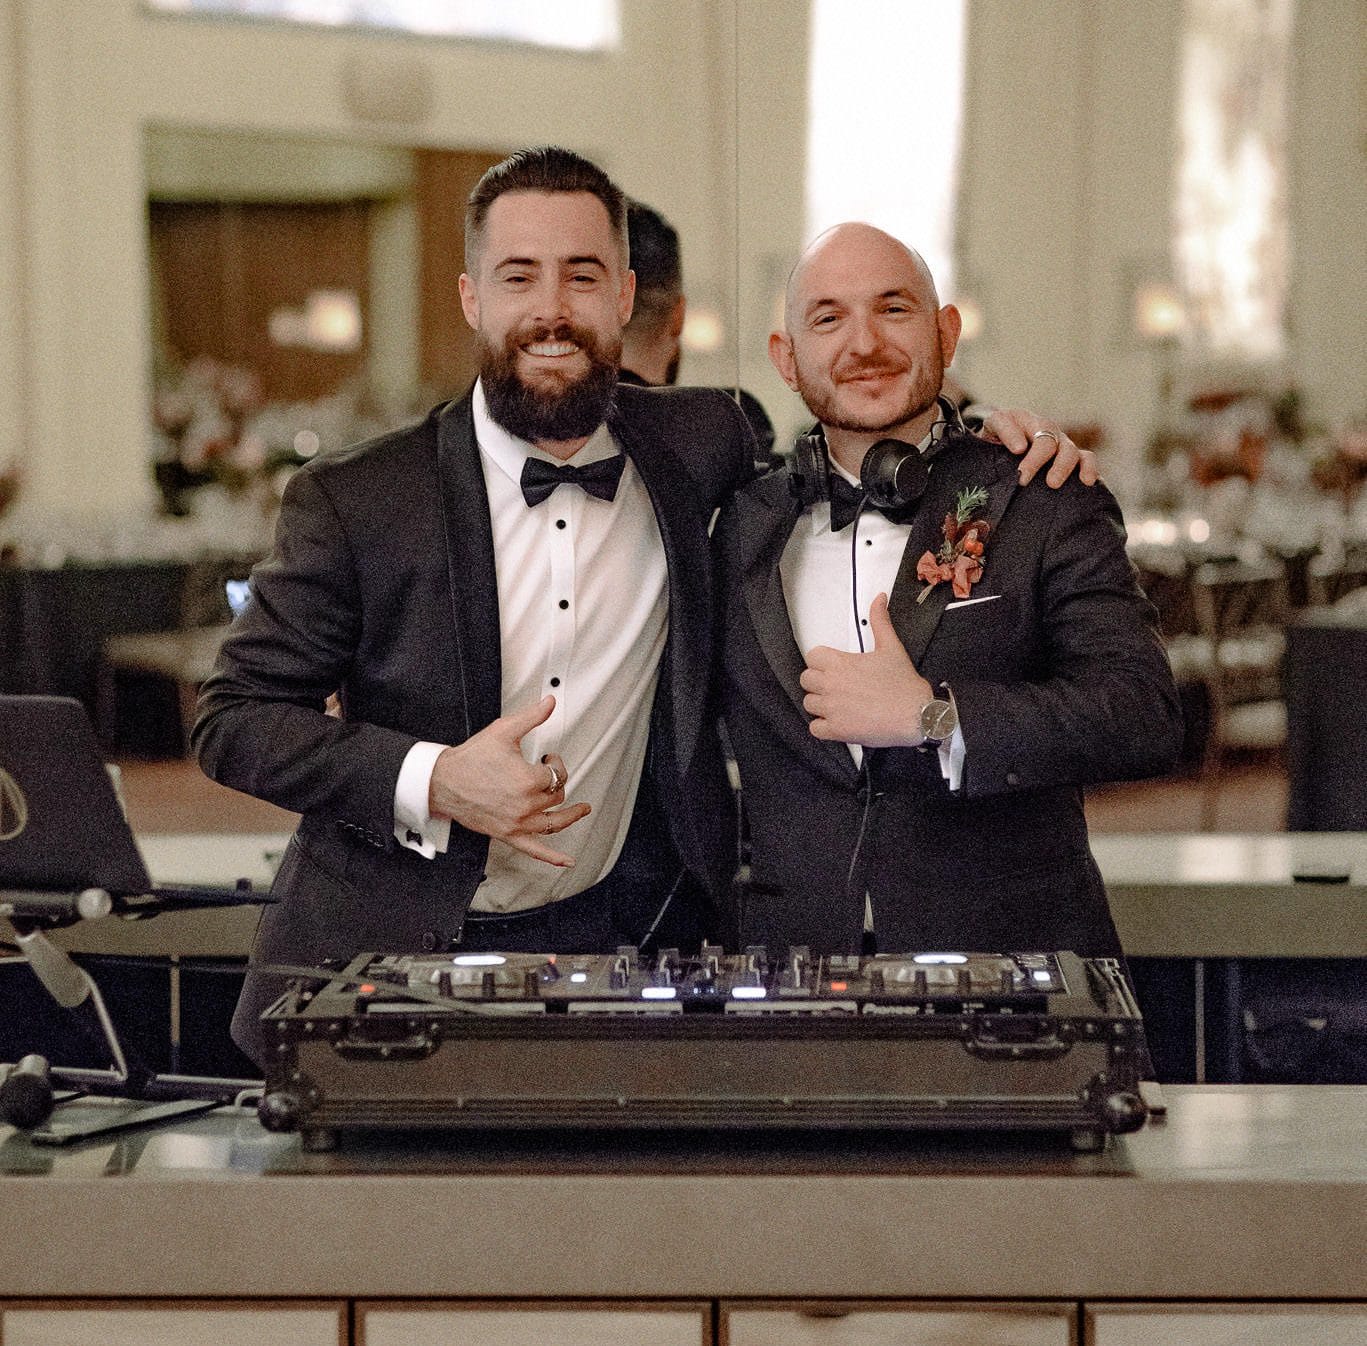 DJ Eddy Mac With A Client At One Of His Weddings